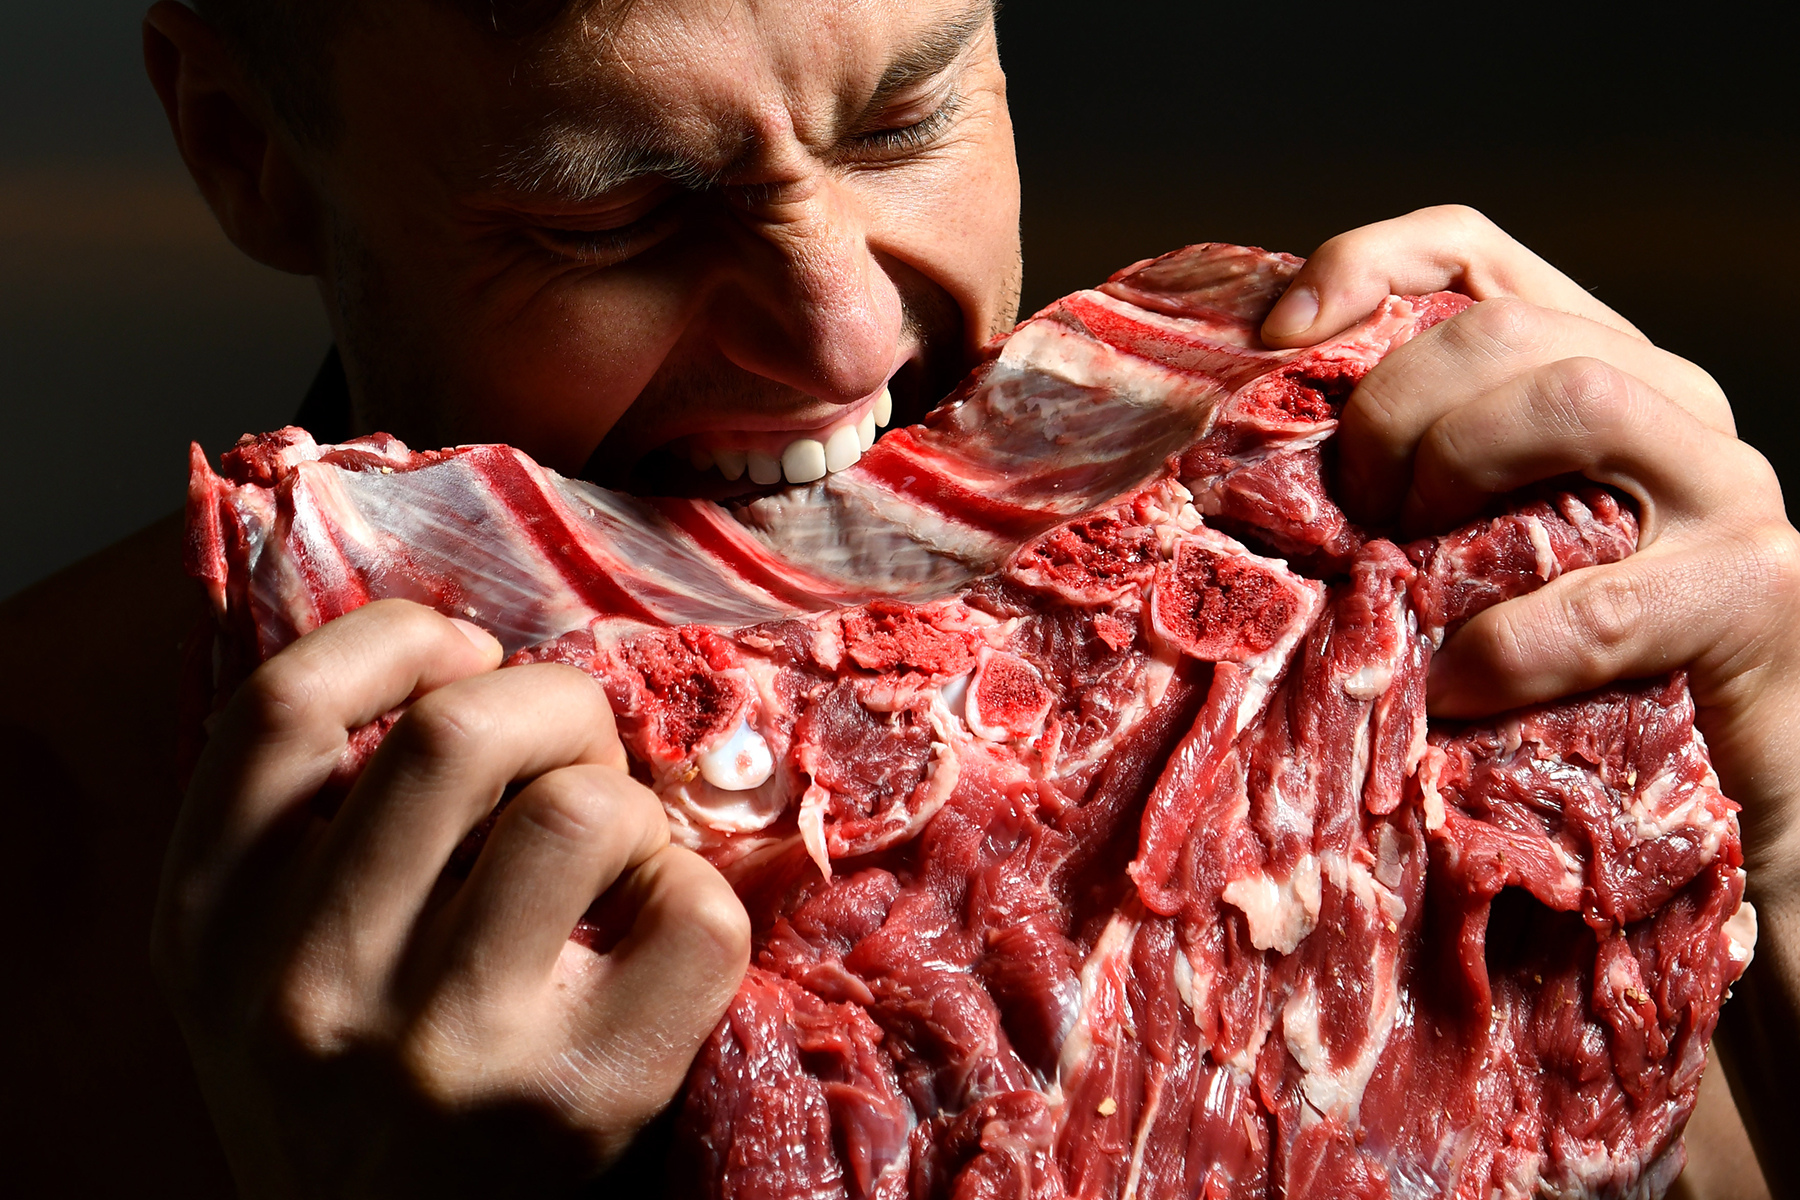 is eating raw meat healthy?